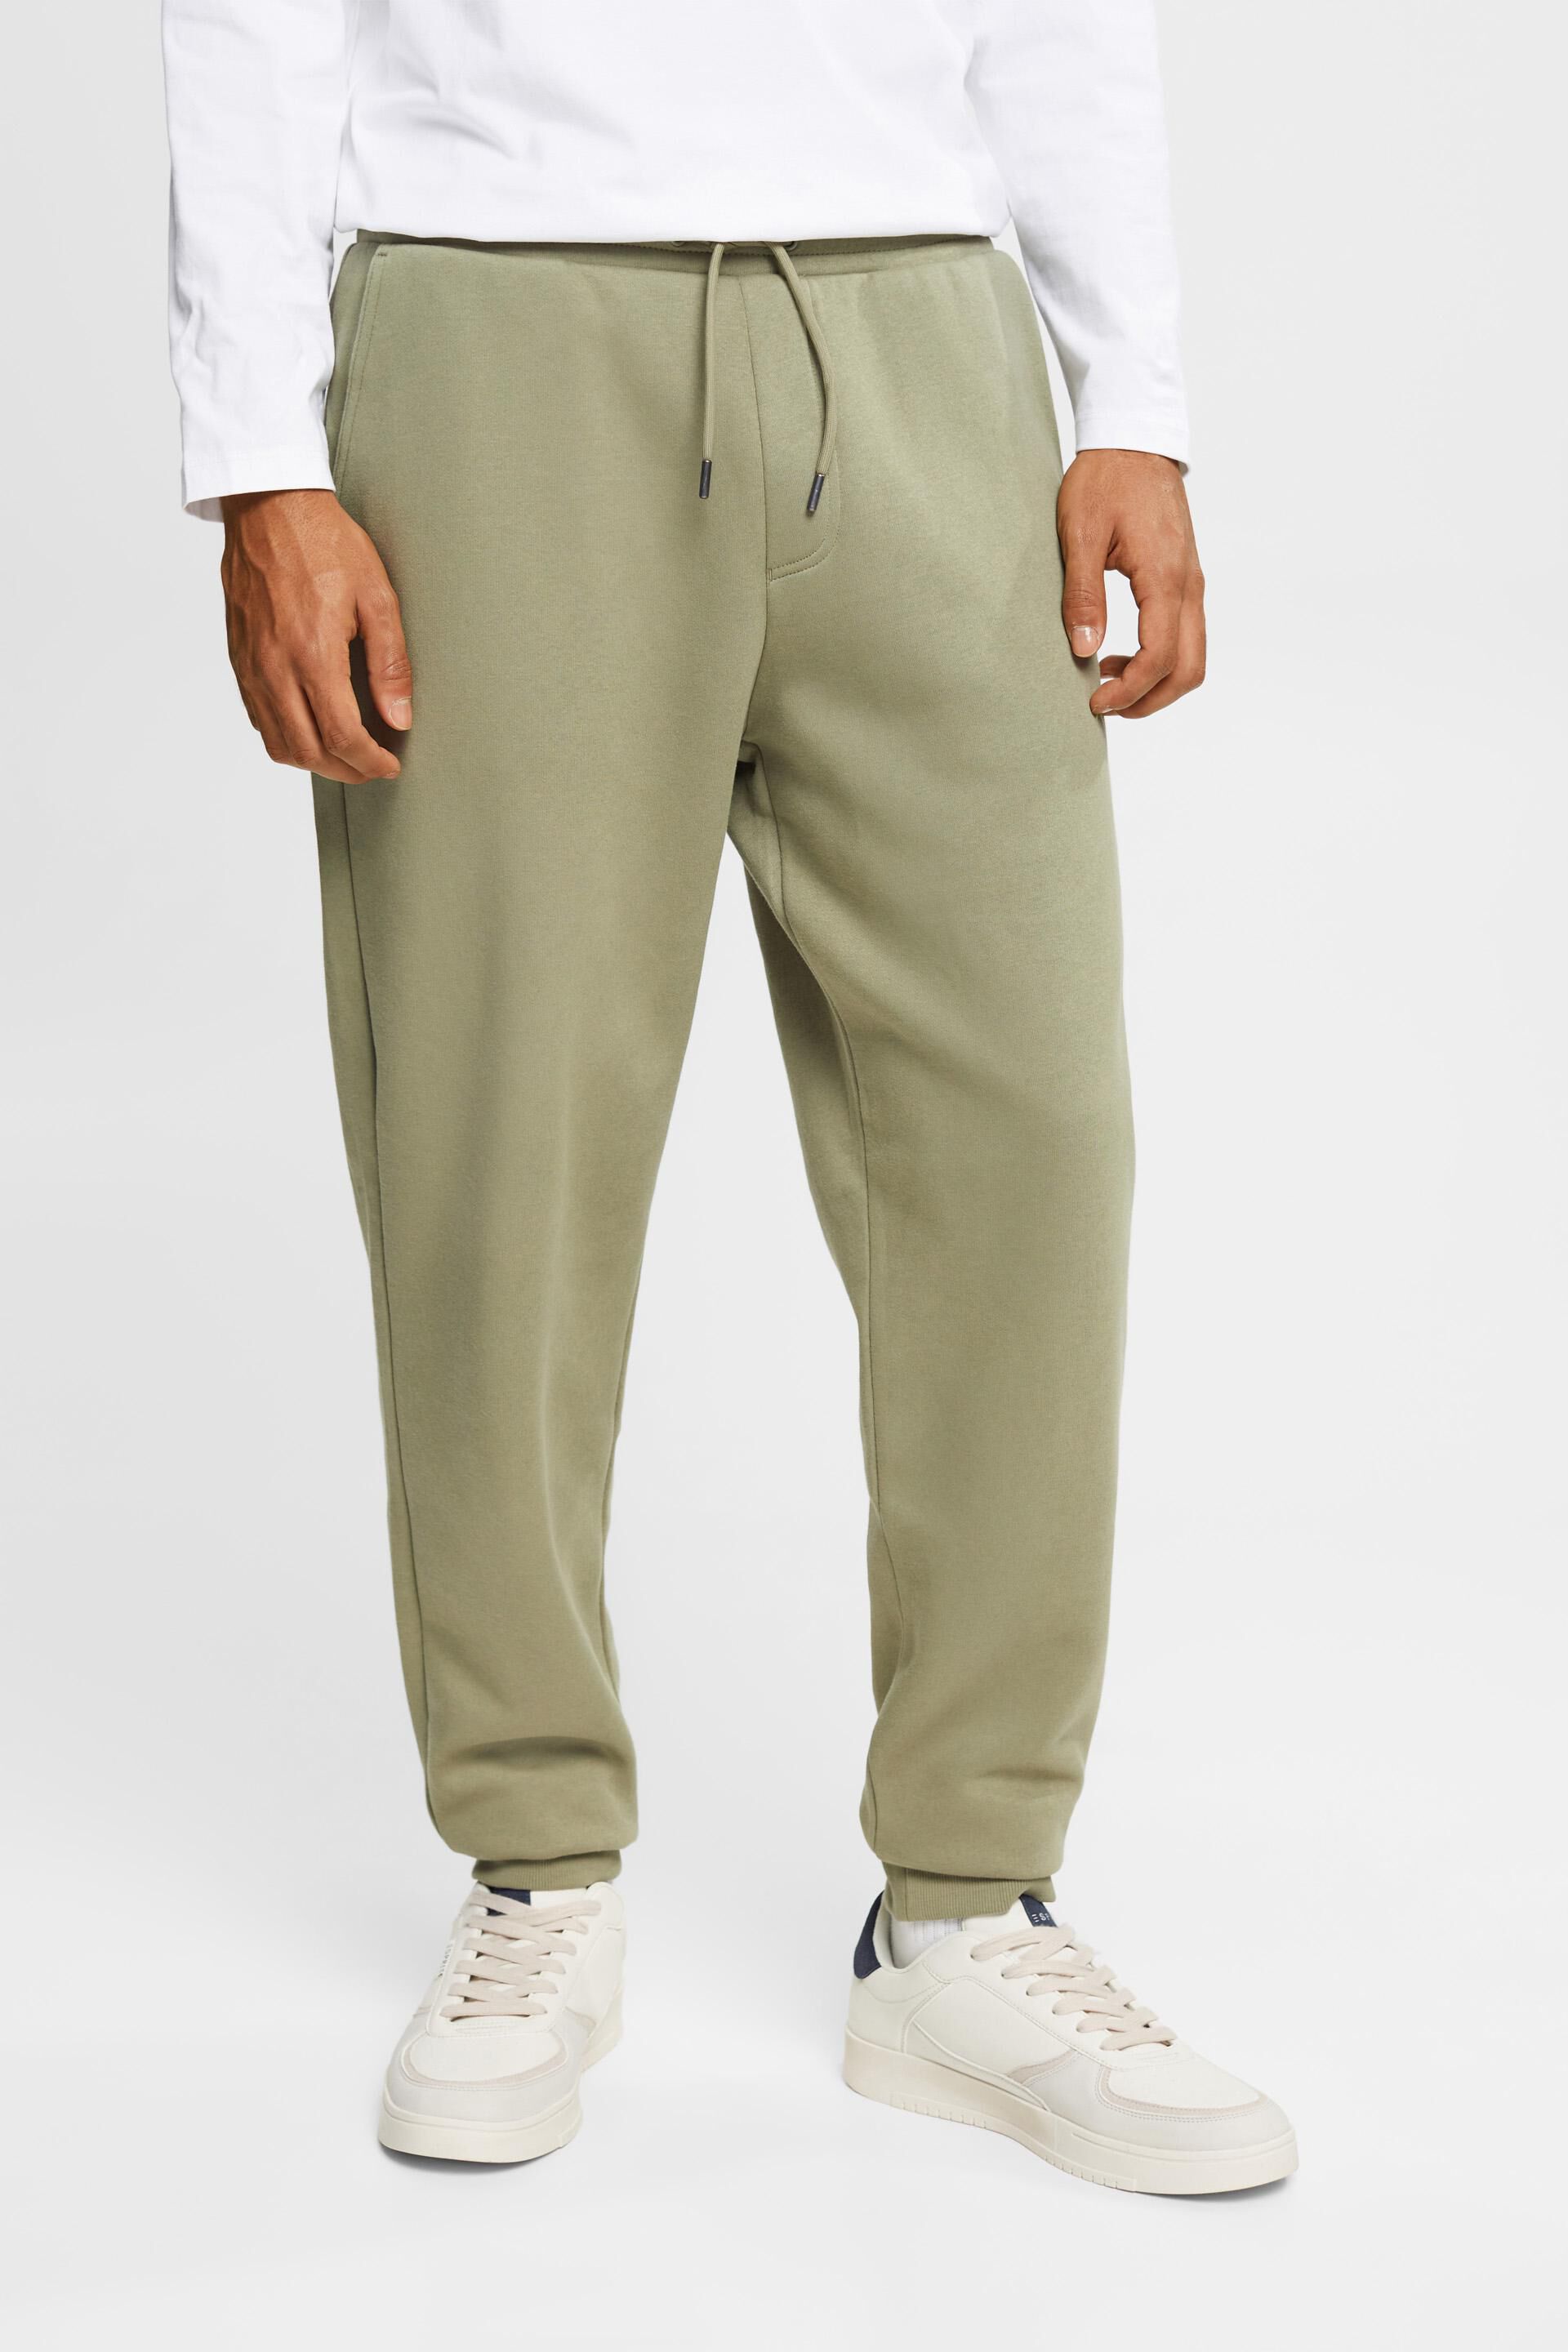 ESPRIT - Made of recycled material: sweatshirt tracksuit bottoms 